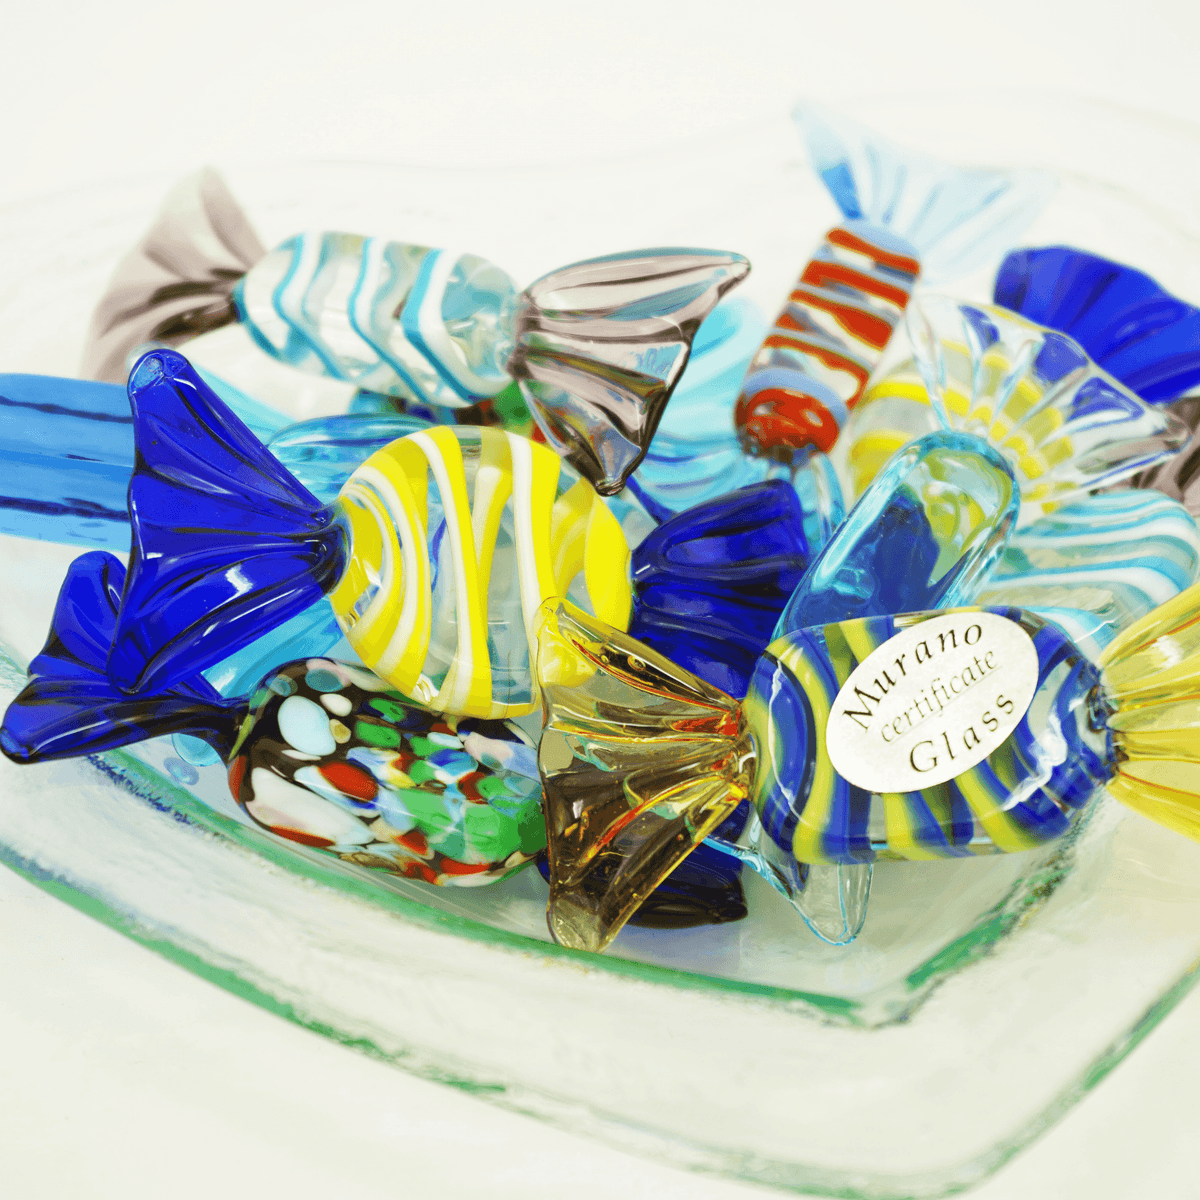 Murano Glass Candy, Classic, Set of 3, 5, or 10 Candies, Decorative Glass Sweets at MyItalianDecor